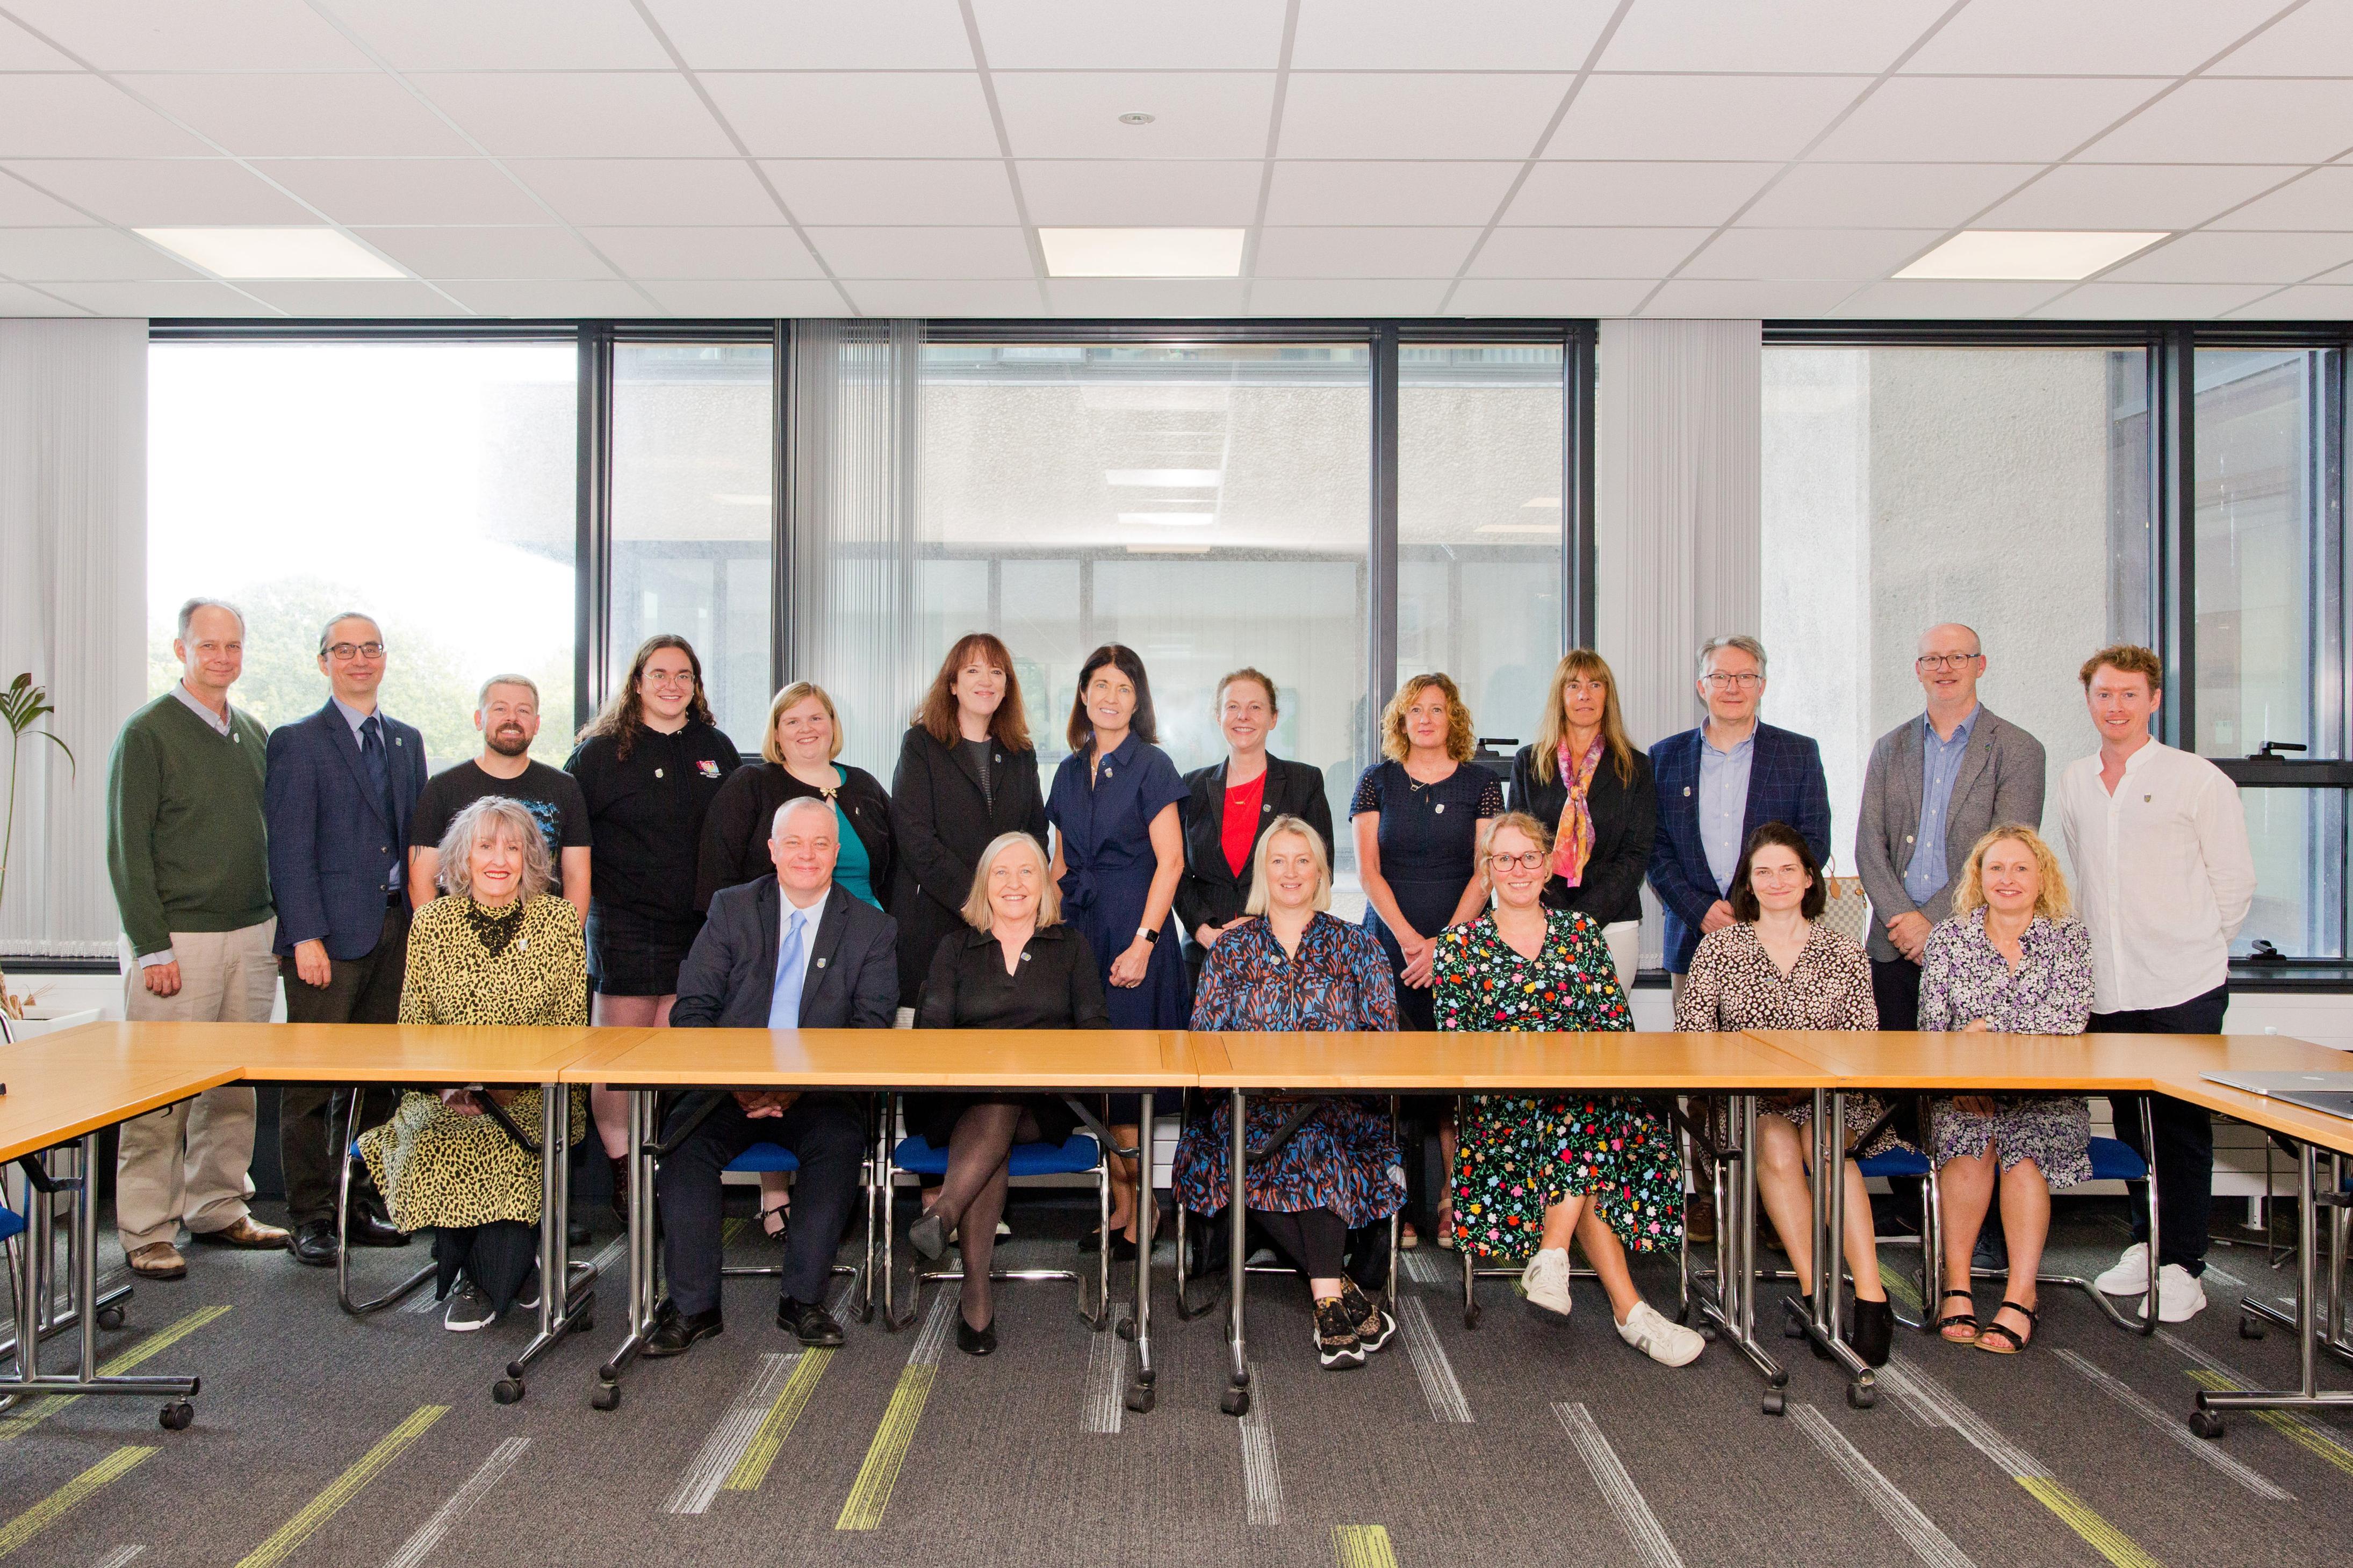 Picture of the members of the Widening Participation Committee sitting and standing